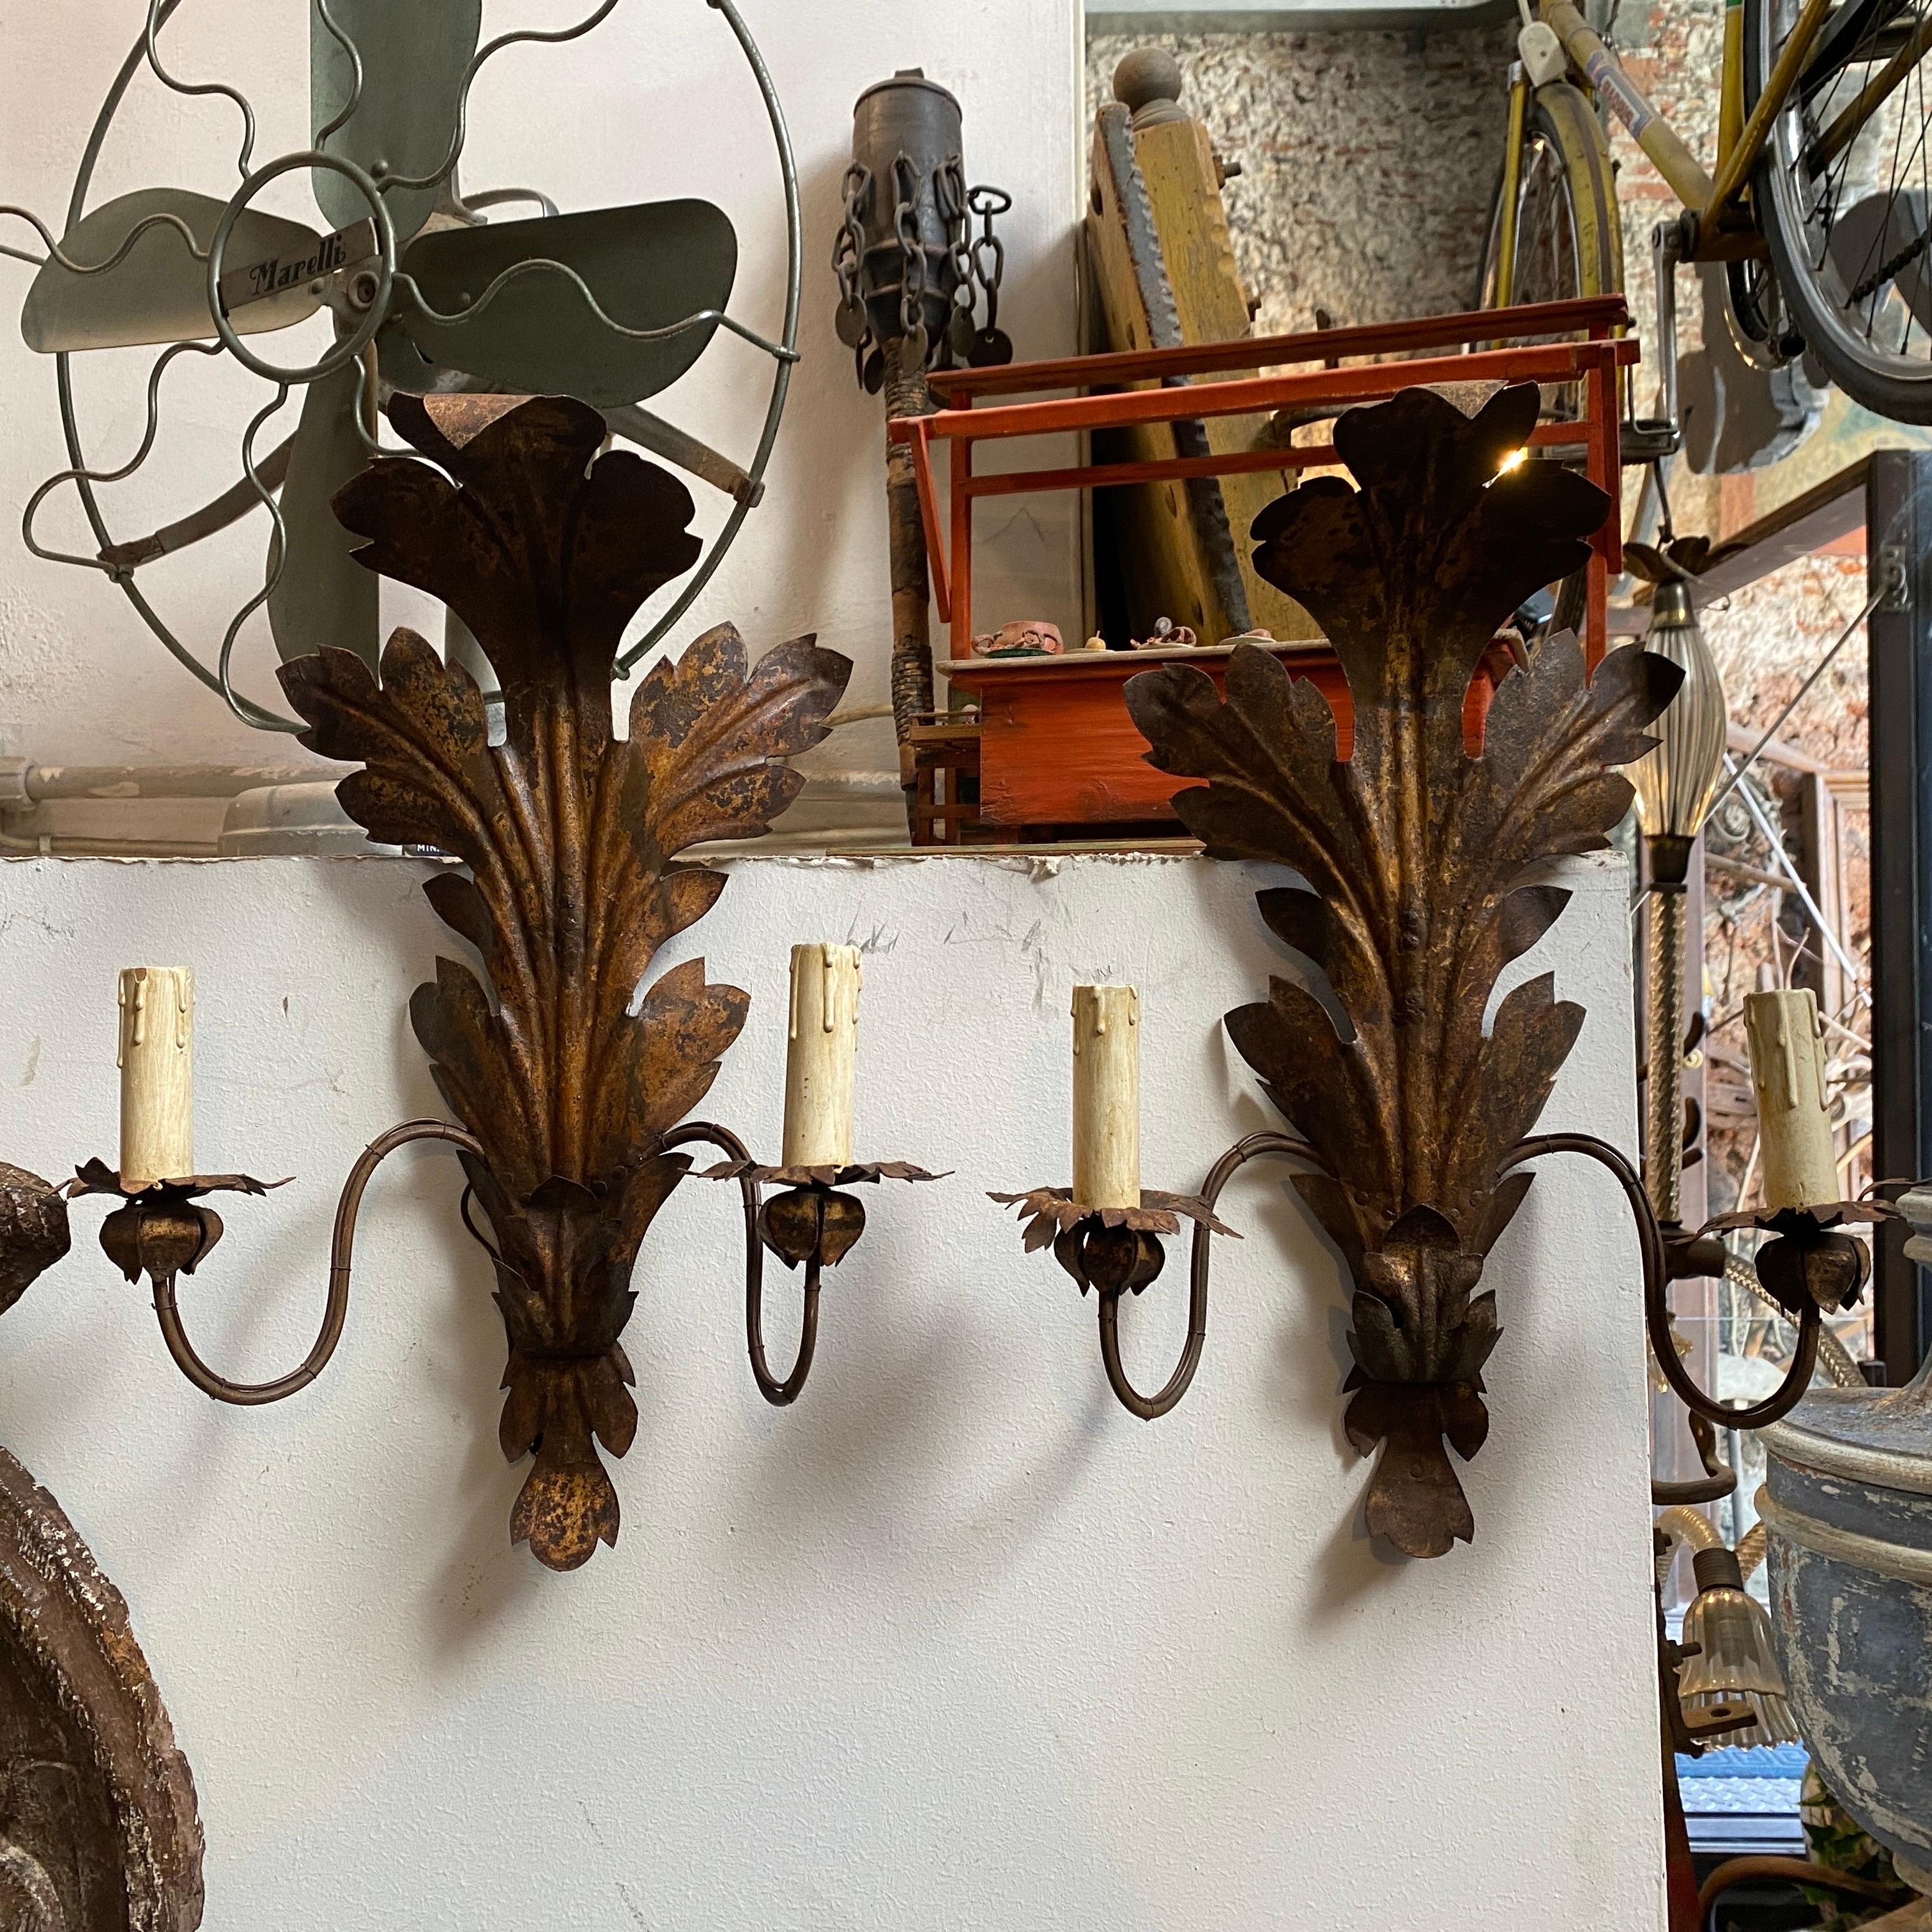 Two antique iron candle sconces hand-crafted in Sicily in the 19th century, they have been electrified in 20th century, the iron part it's in original patina and condition.